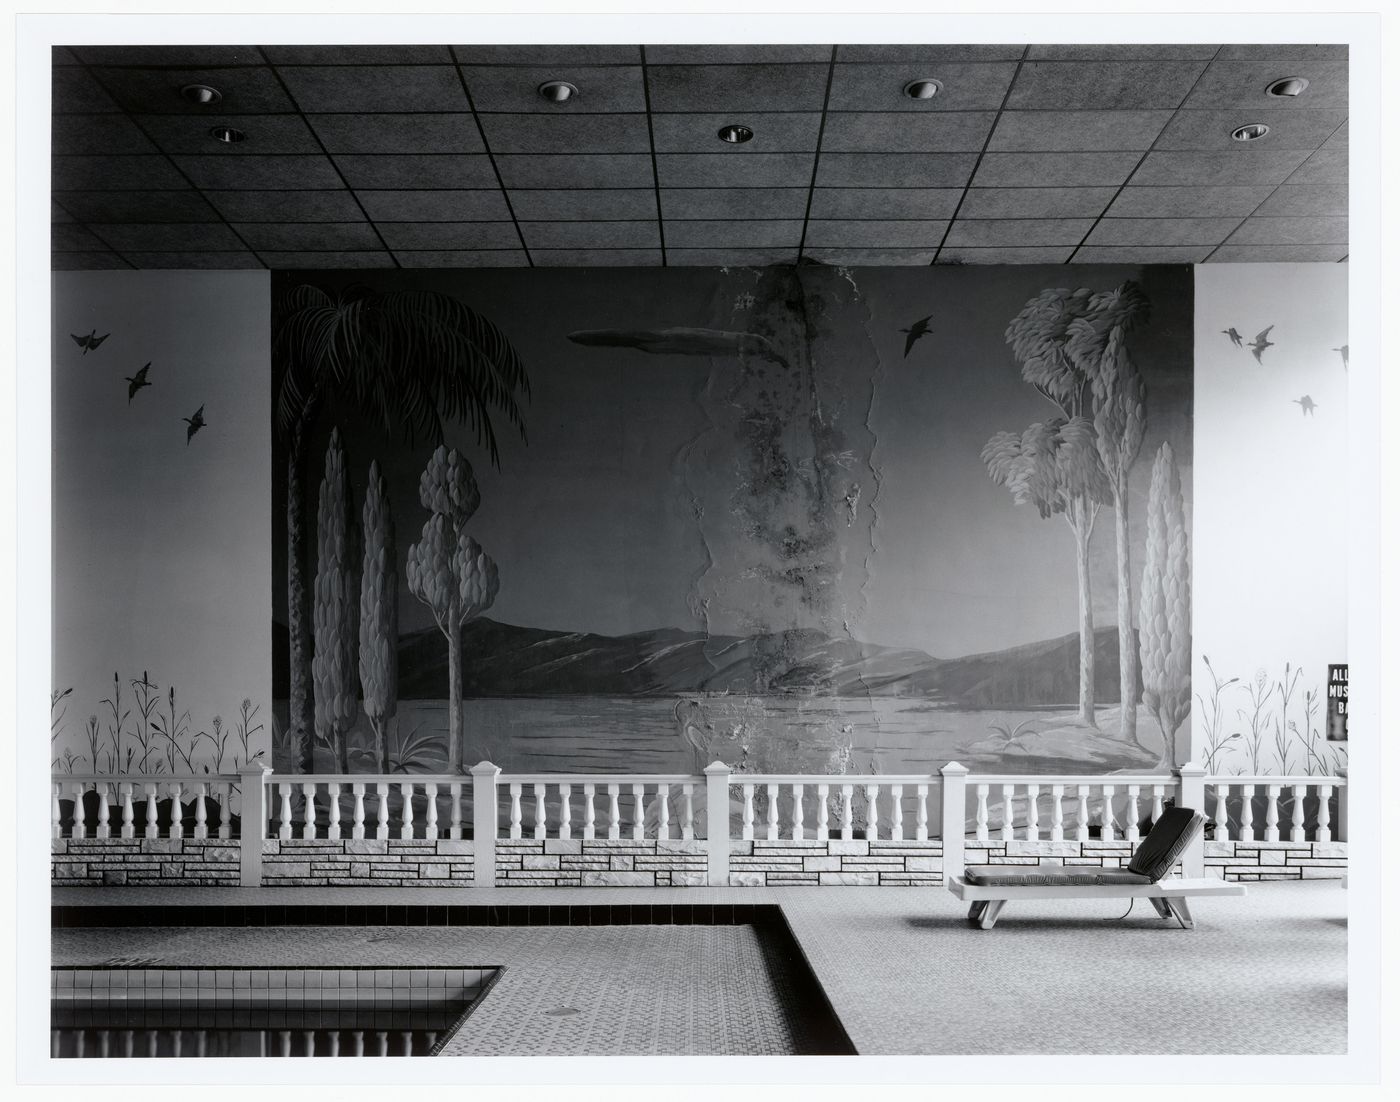 Swimming Pool (printed on mat): interior with swimming pool and mural of landscape with lake and mountains